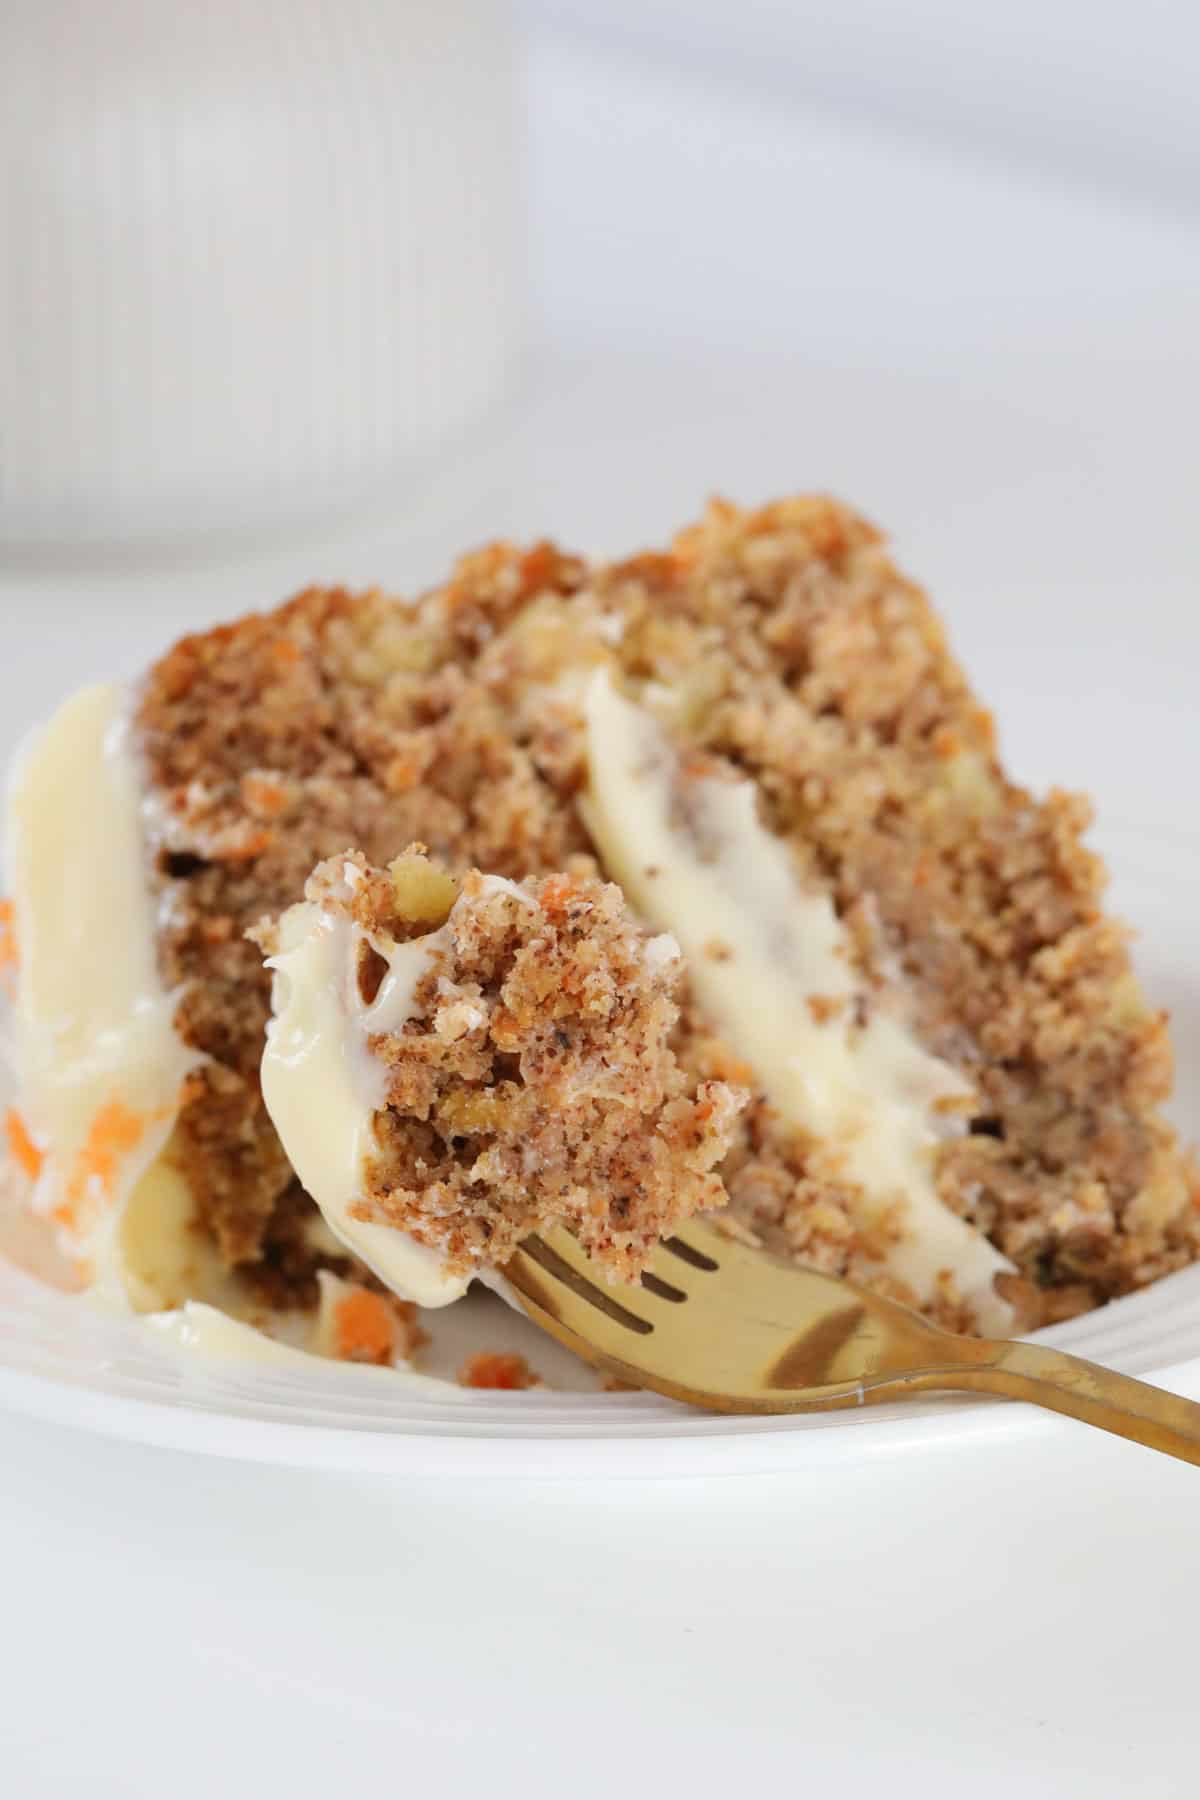 A forkful of carrot cake, resting on a plate.